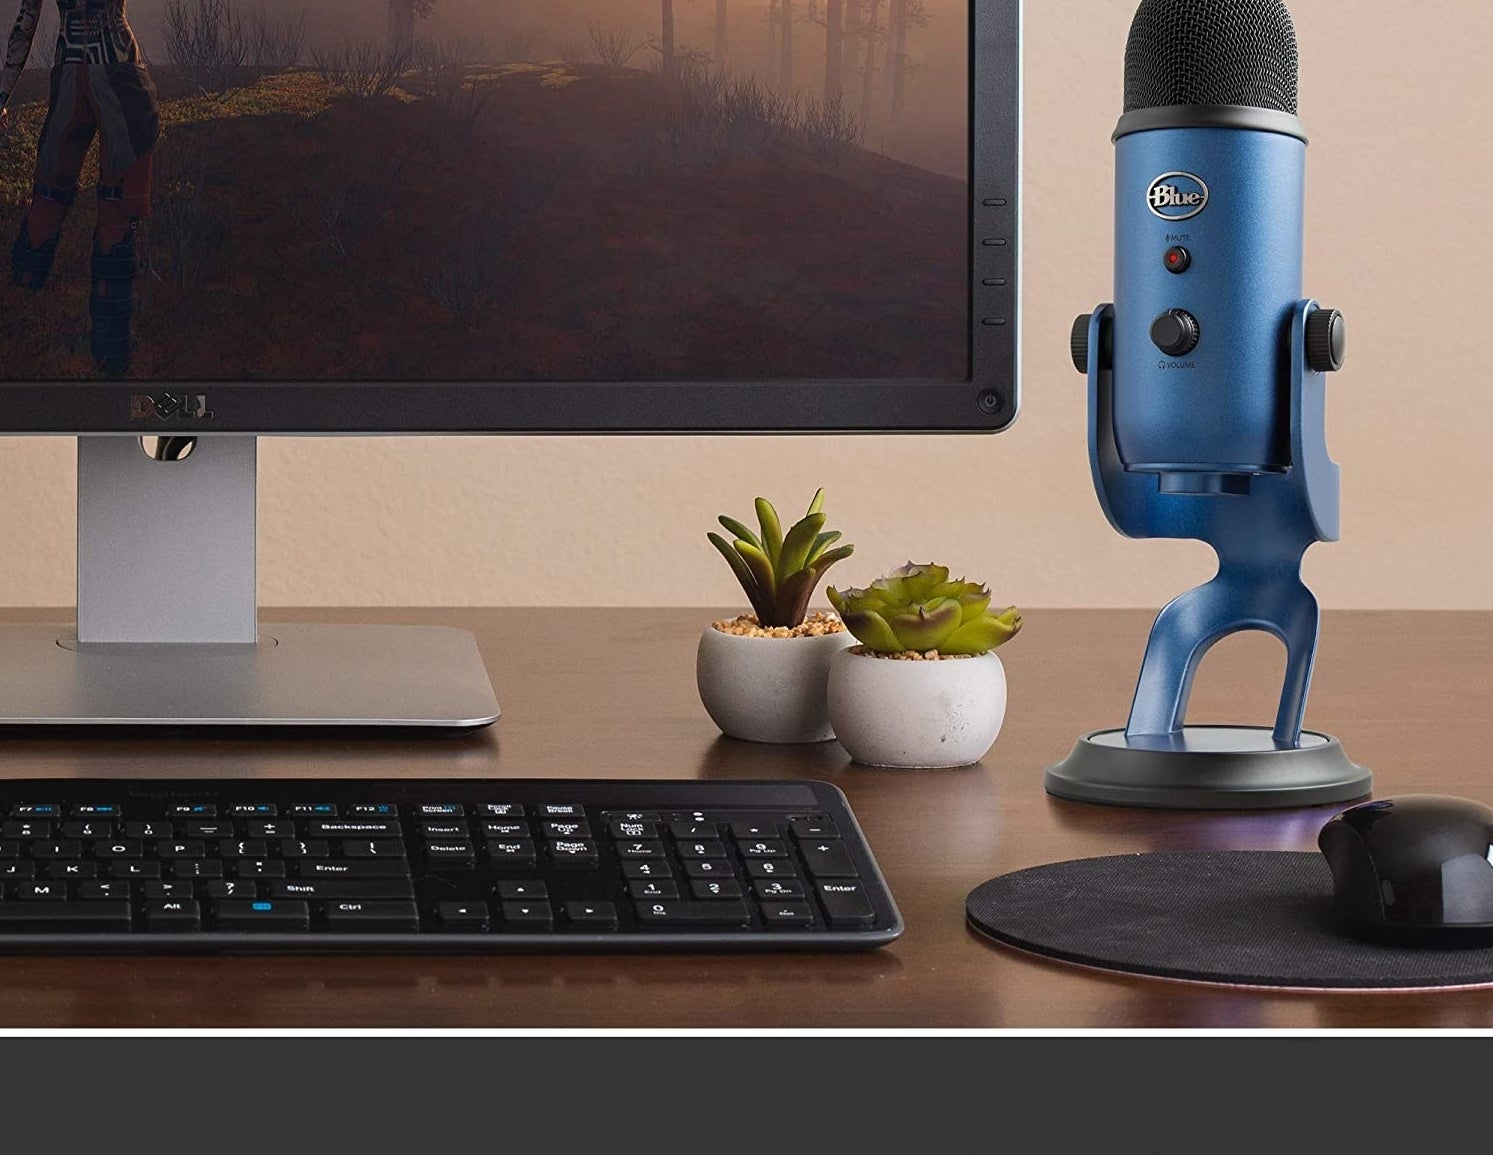 The microphone on a desk next to a computer